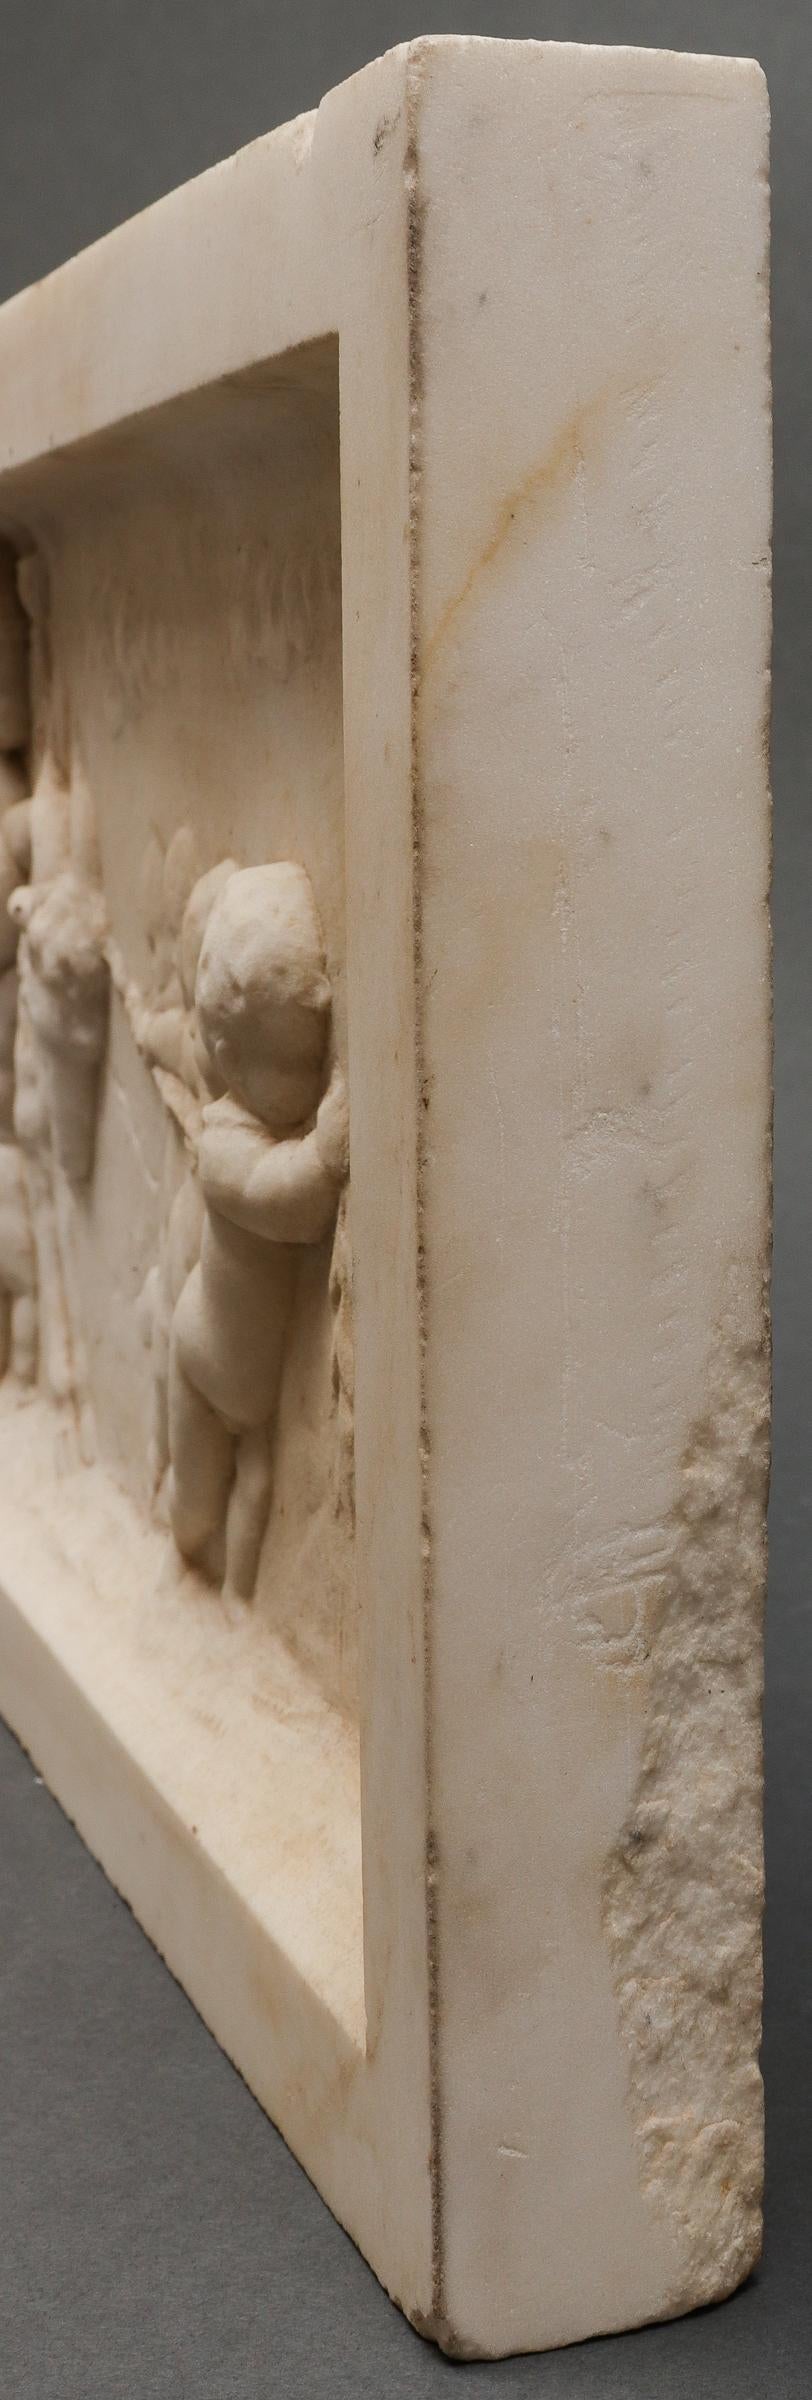 19th Century Neoclassical Carved Marble Bas-Relief Architectural Plaque with Cherubs